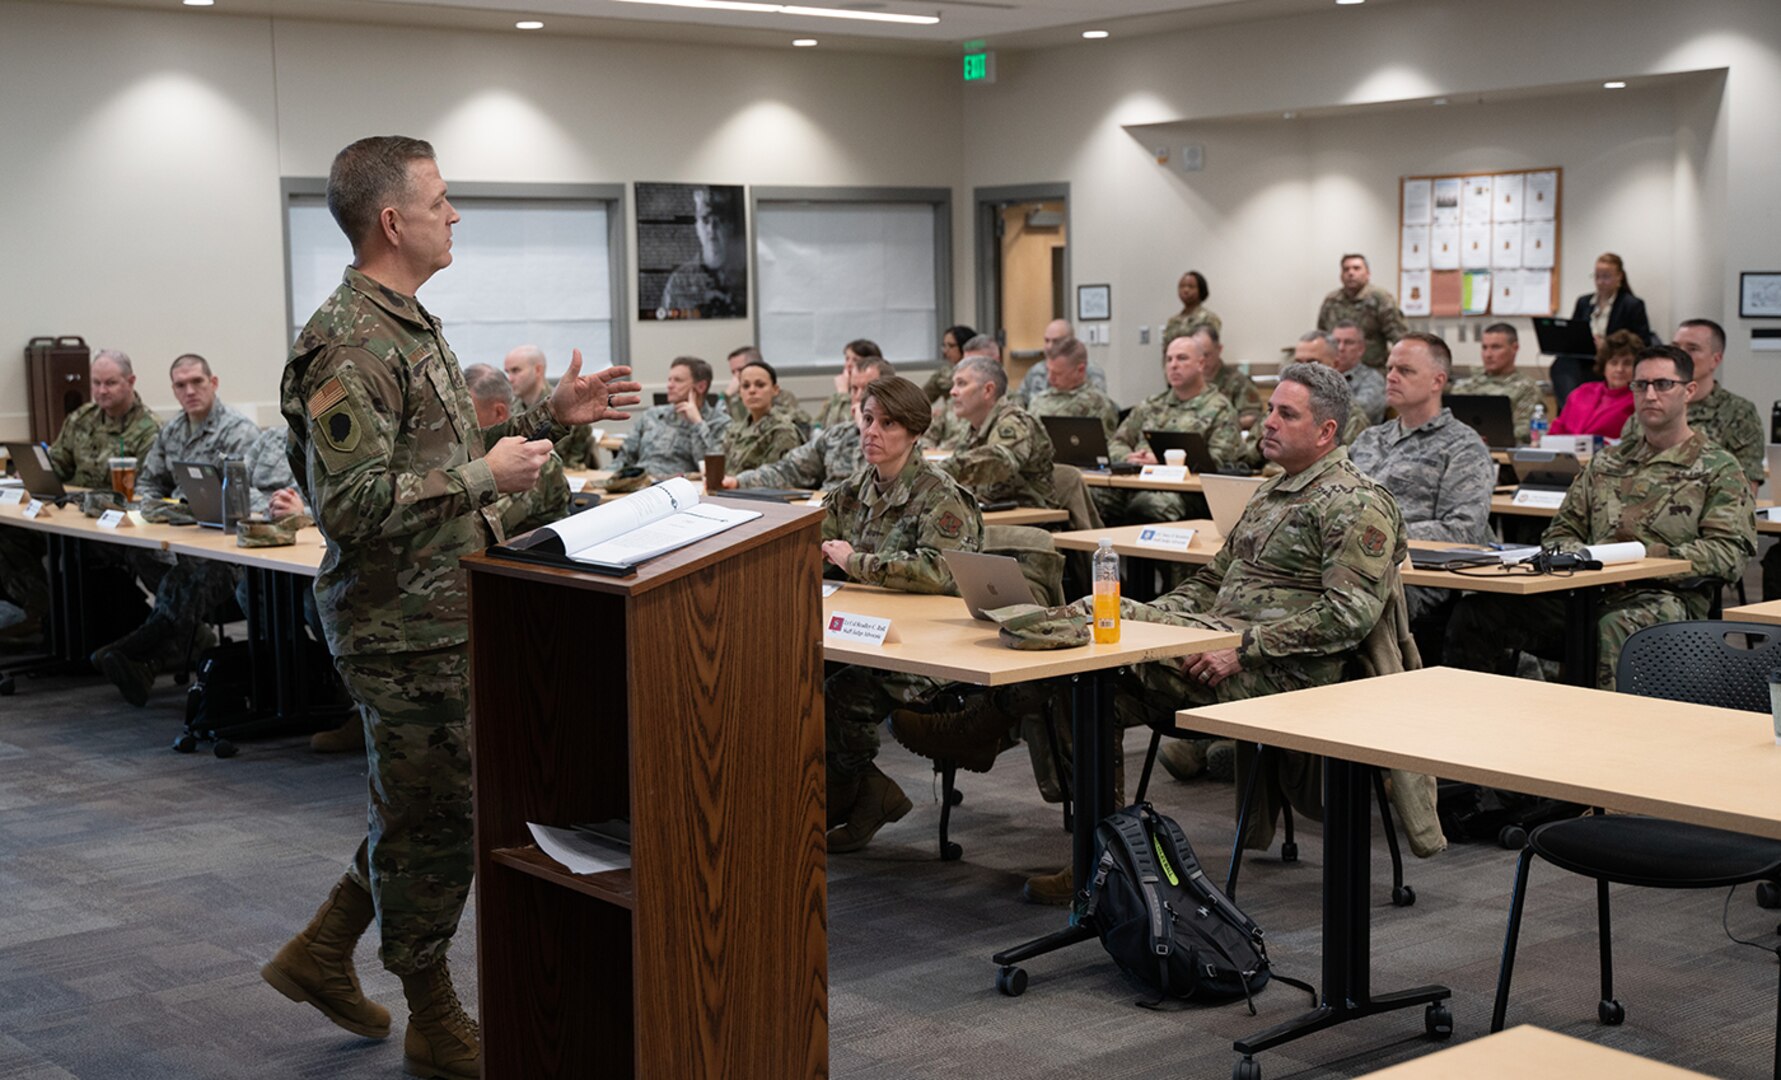 Brig. Gen. Richard R. Neely, Adjutant General, Illinois National Guard and Director of the Illinois Department of Military Affairs, addresses attendees at the Cyber Law course